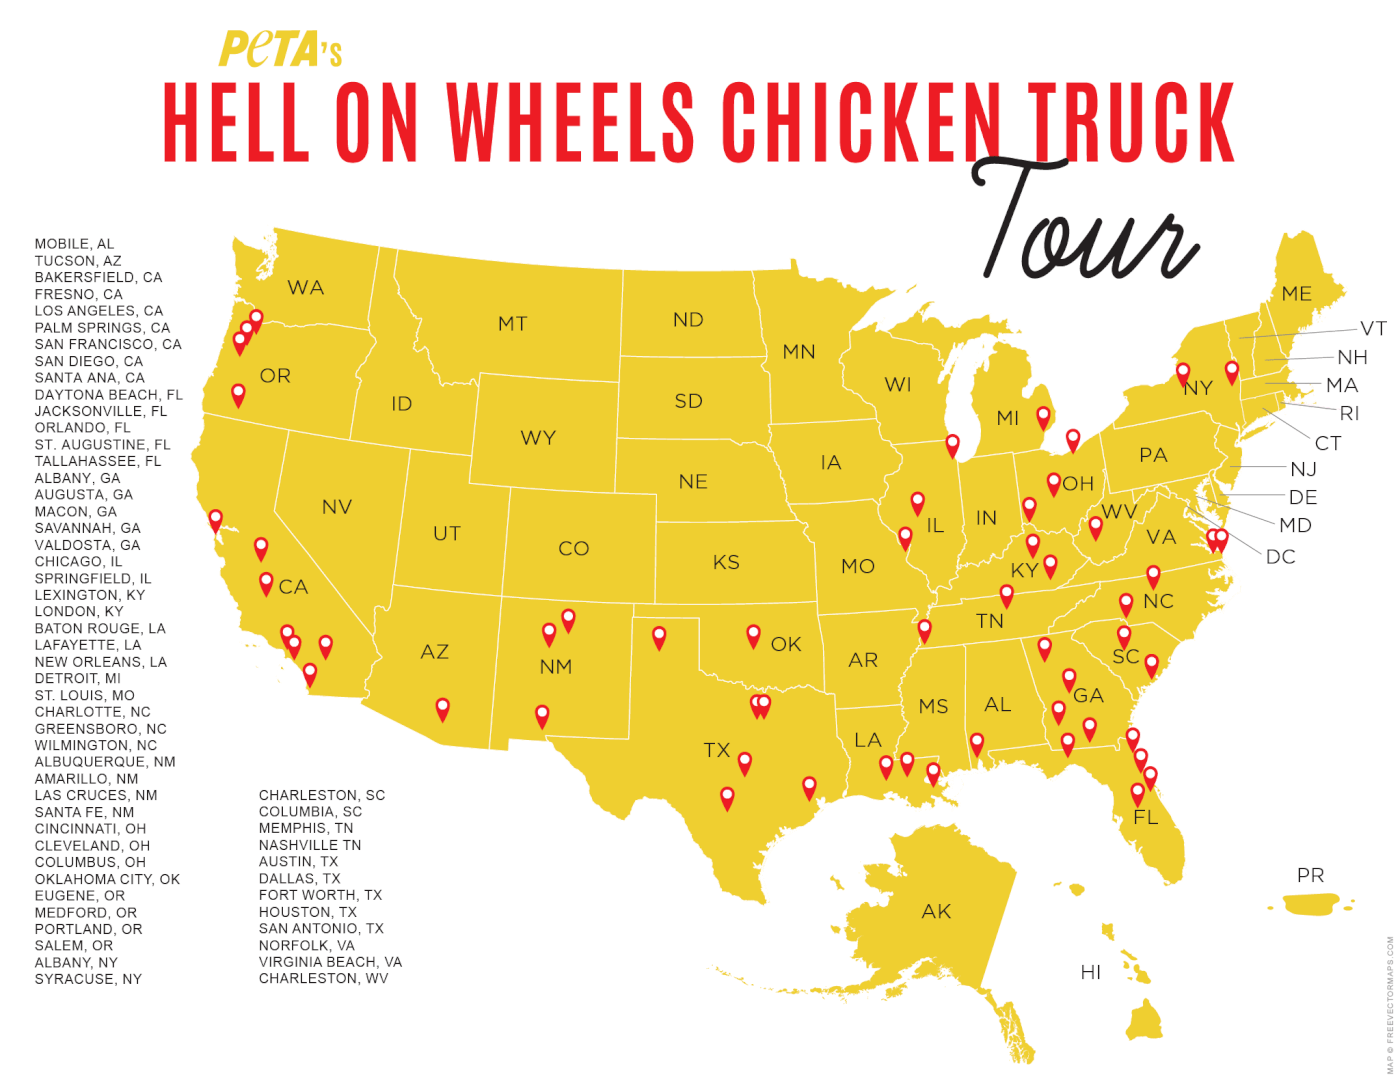 infographic map shows the nearly 50 U.S. cities visited by PETA's "Hell on Wheels" truck